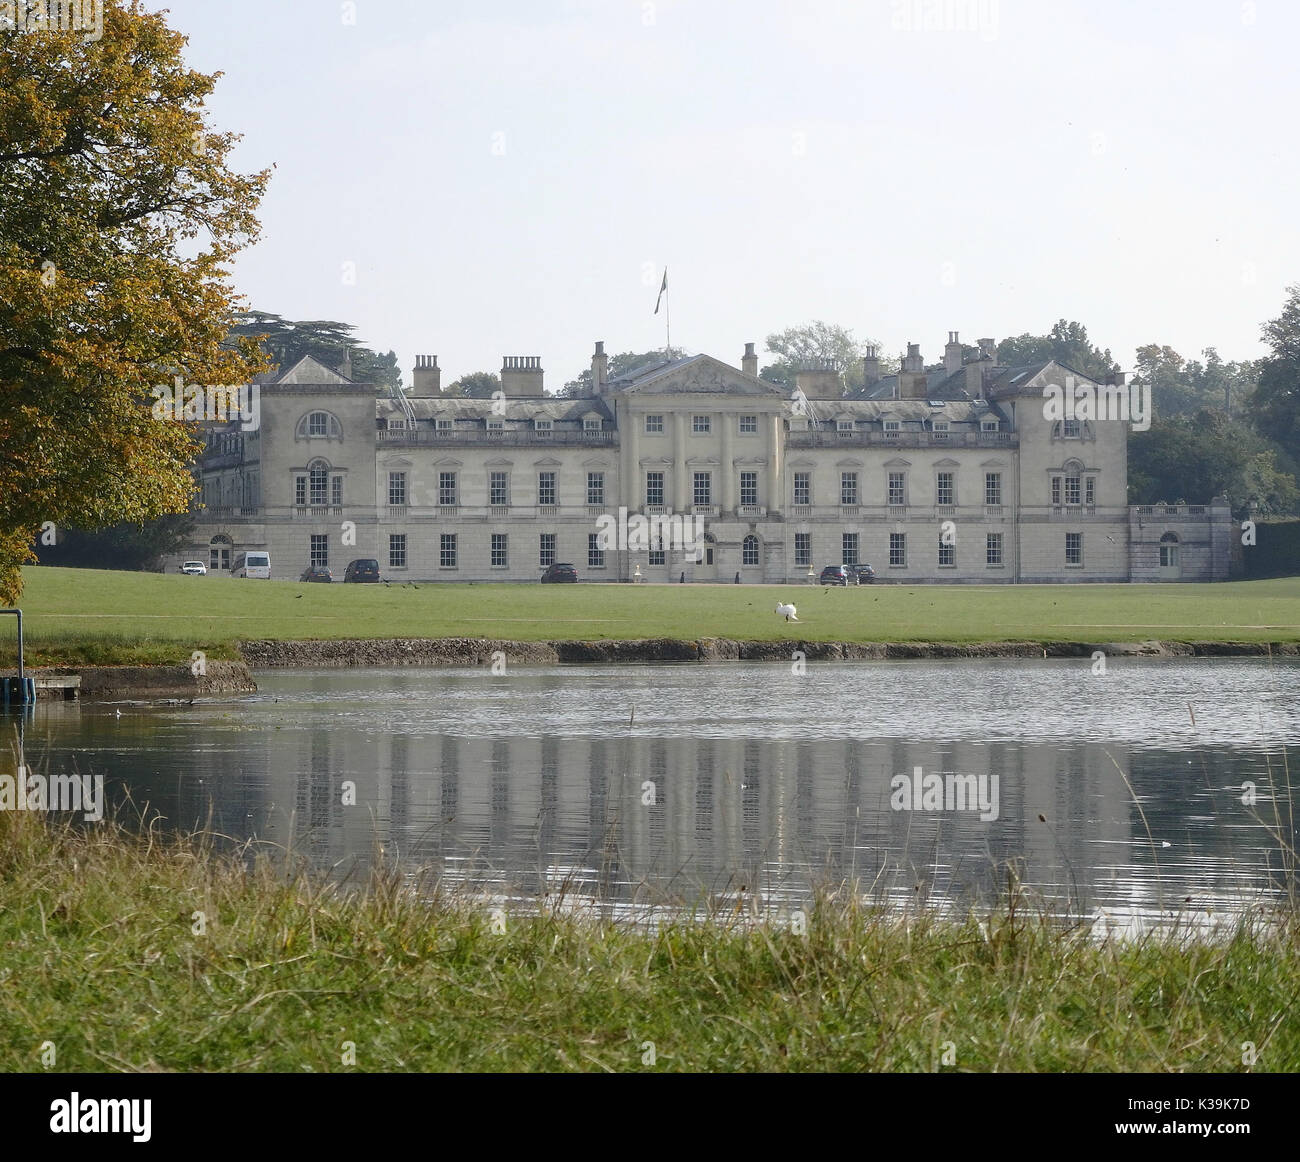 The Exterior of the beautiful Stately Home in Bedfordshire, Woburn Abbey in England located close to Centre Parcs Stock Photo